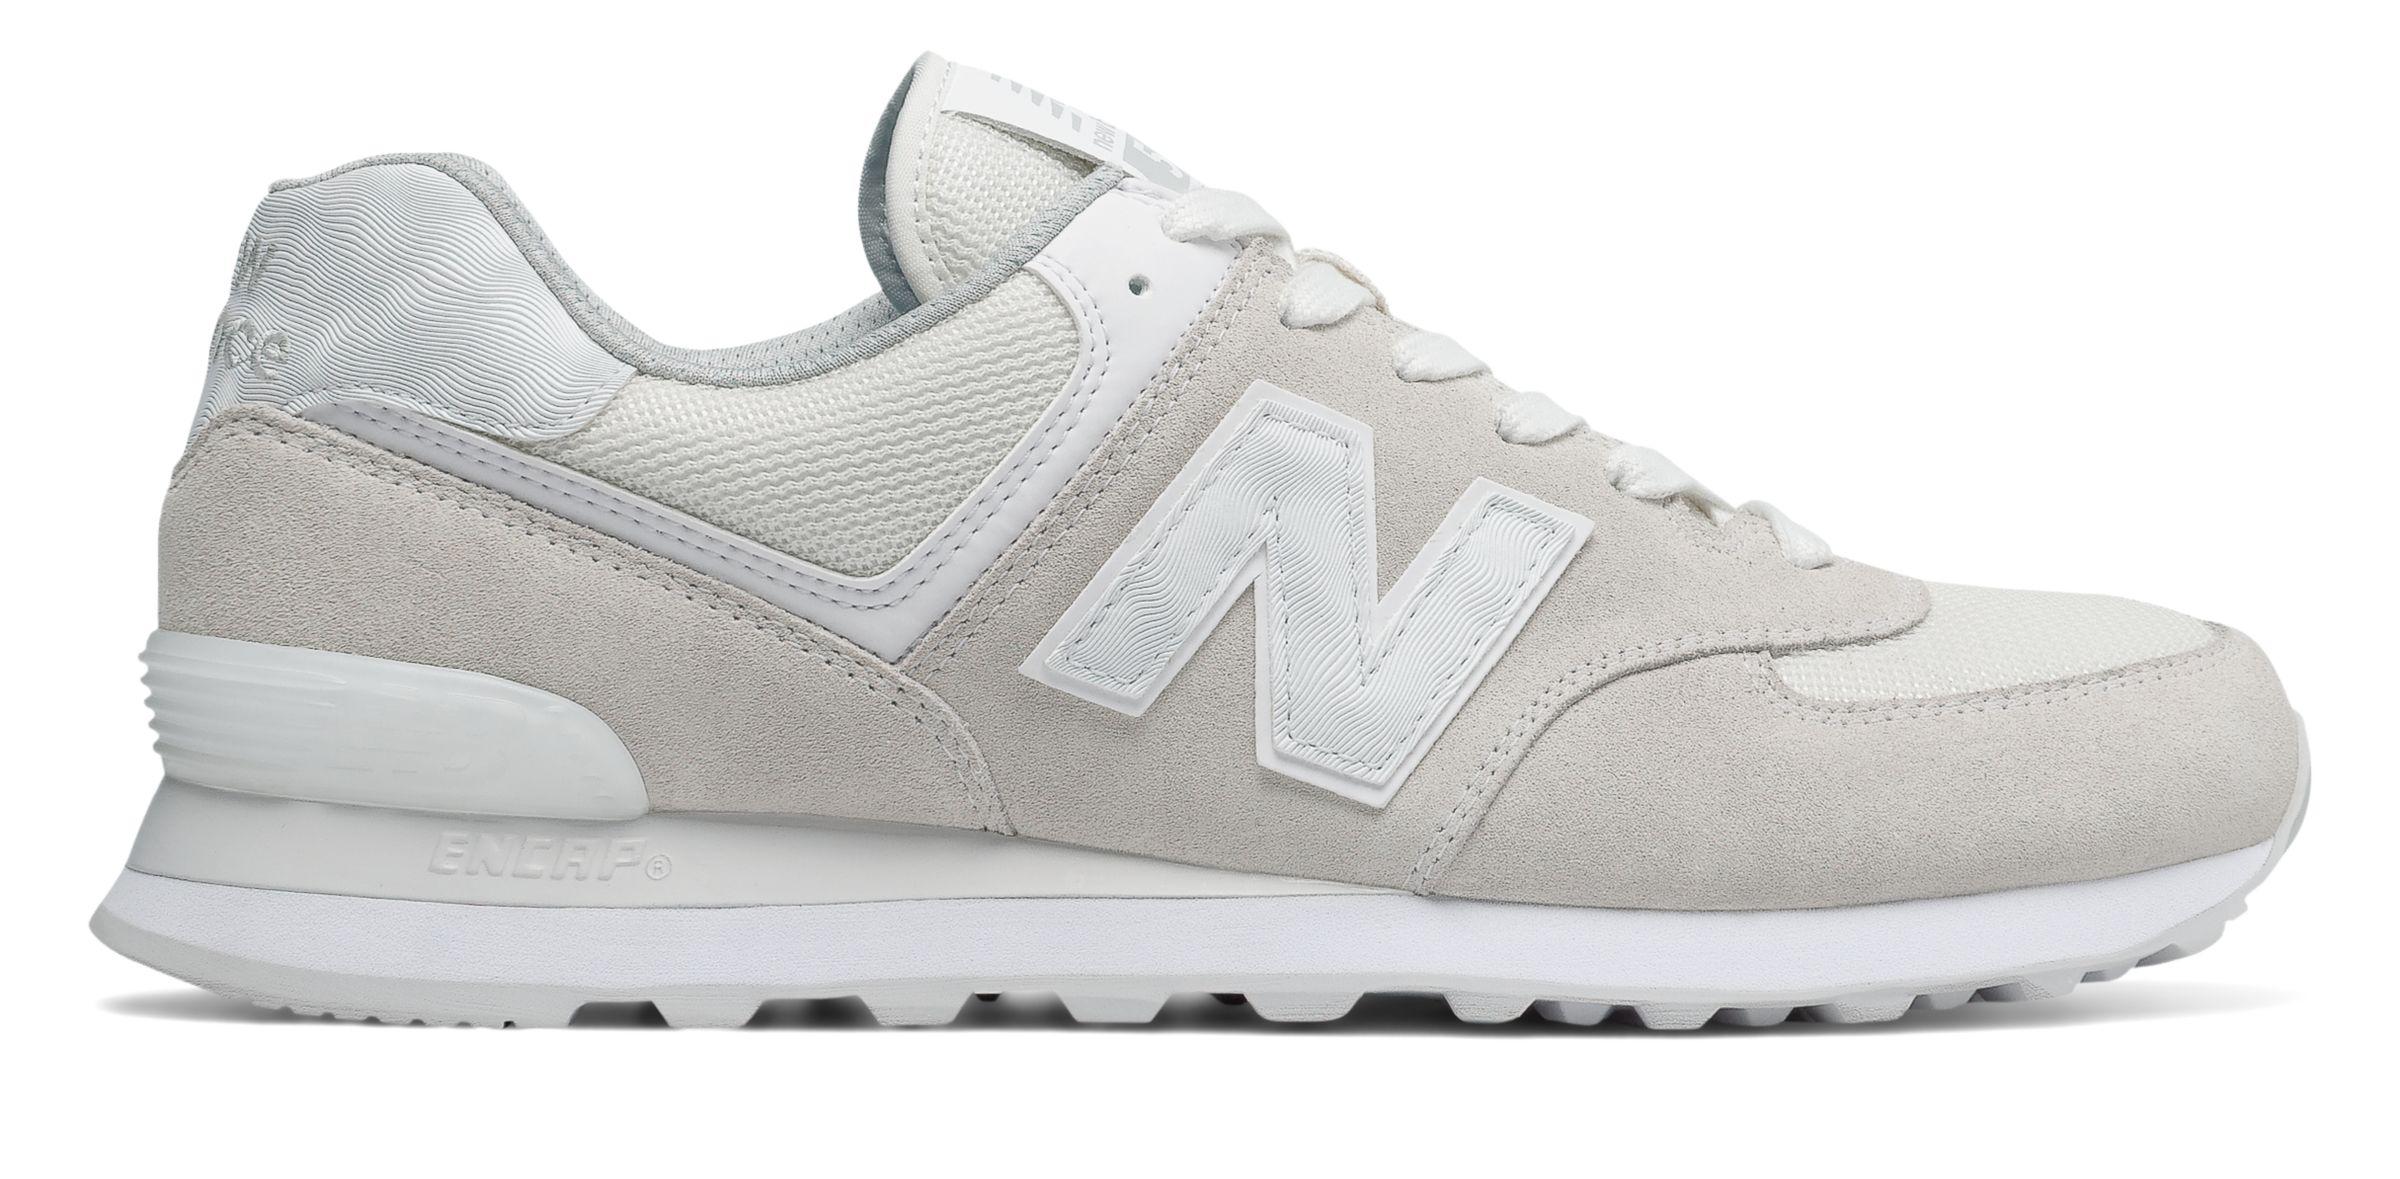 New Balance Suede 574 in White for Men - Lyst